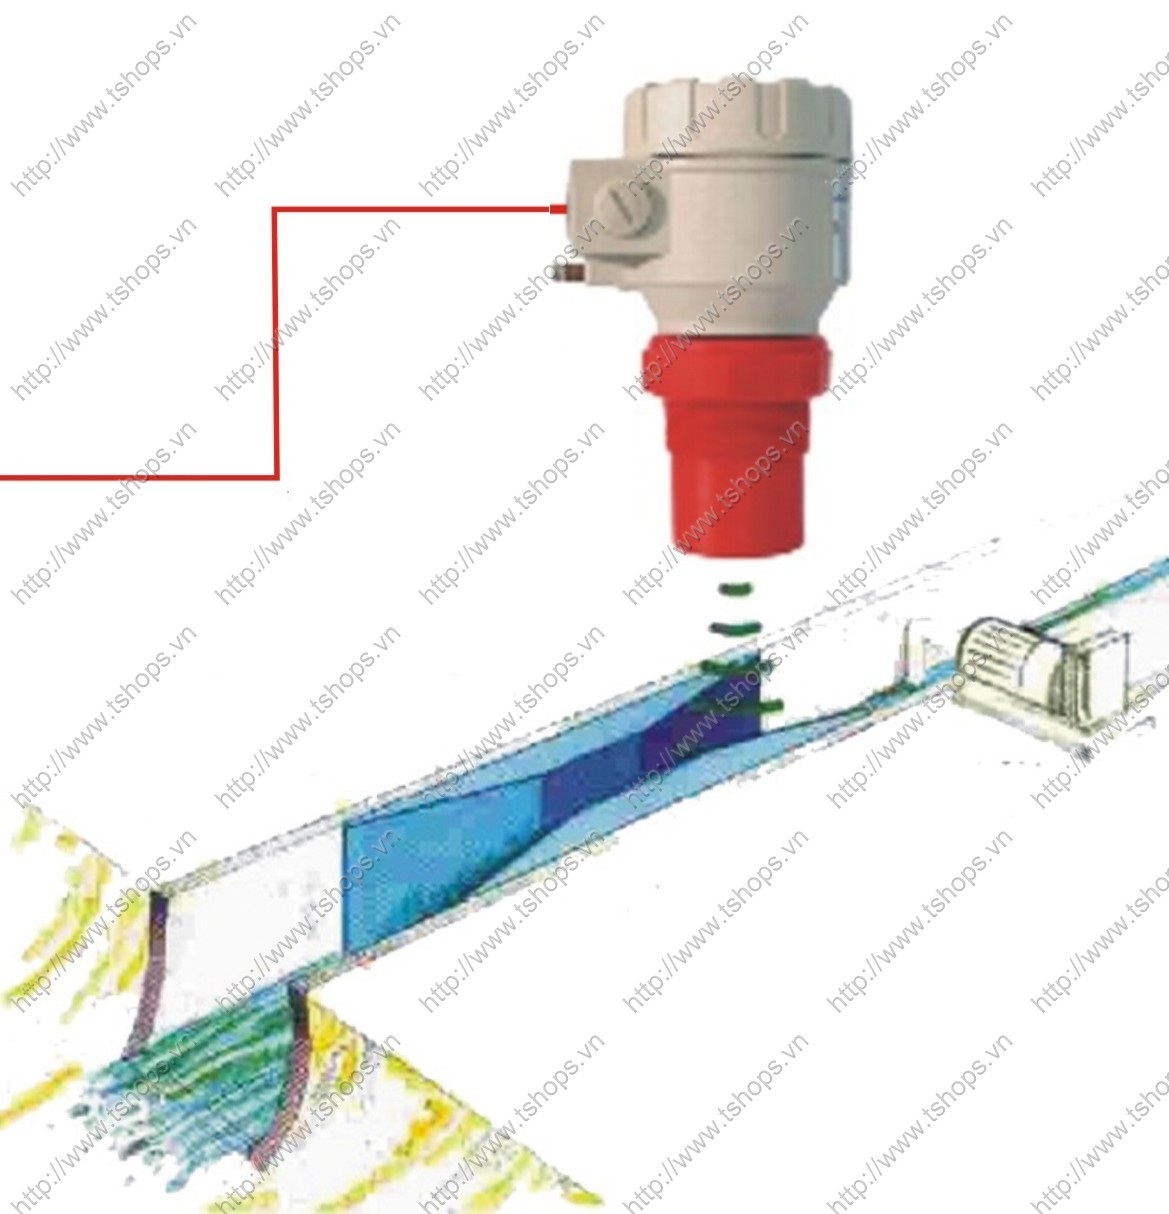 PARSHALL flume - (Open channel flow meters)